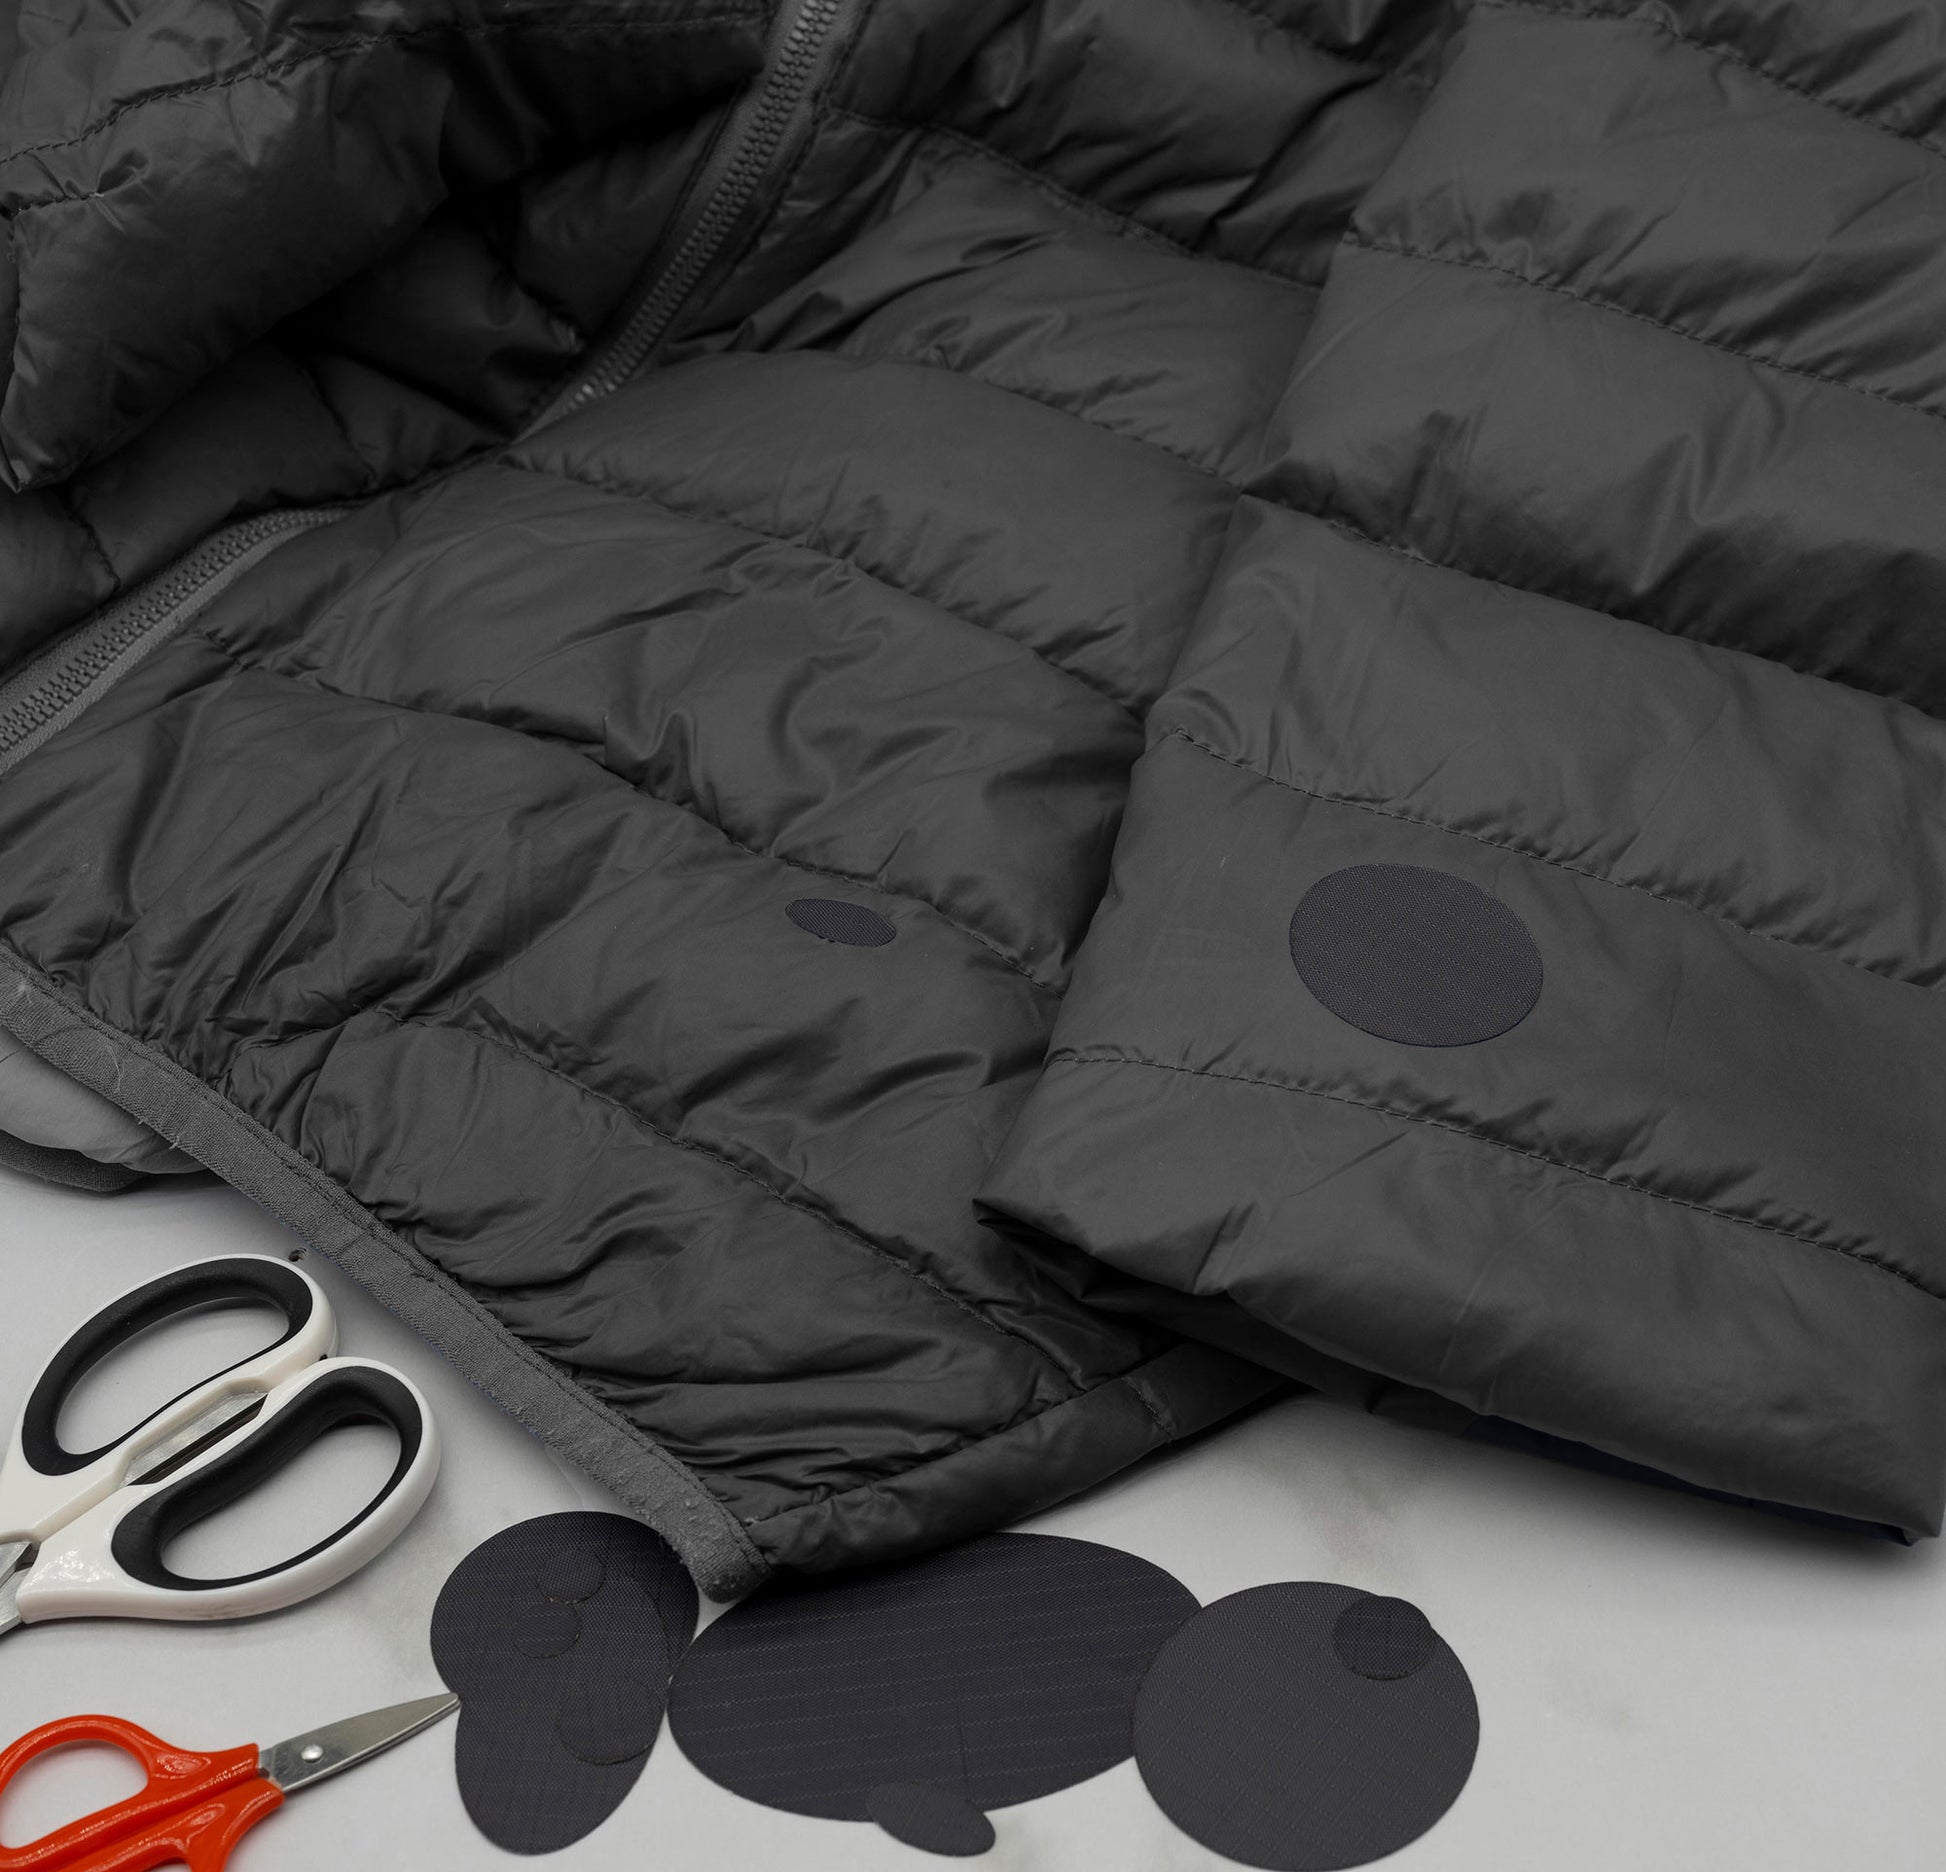  rip-stop nylon fabric is waterproof, tear resistant and can be used to fix torn umbrellas, gloves, bags, backpacks, skiing clothing, sleeping bags, down jackets, tents